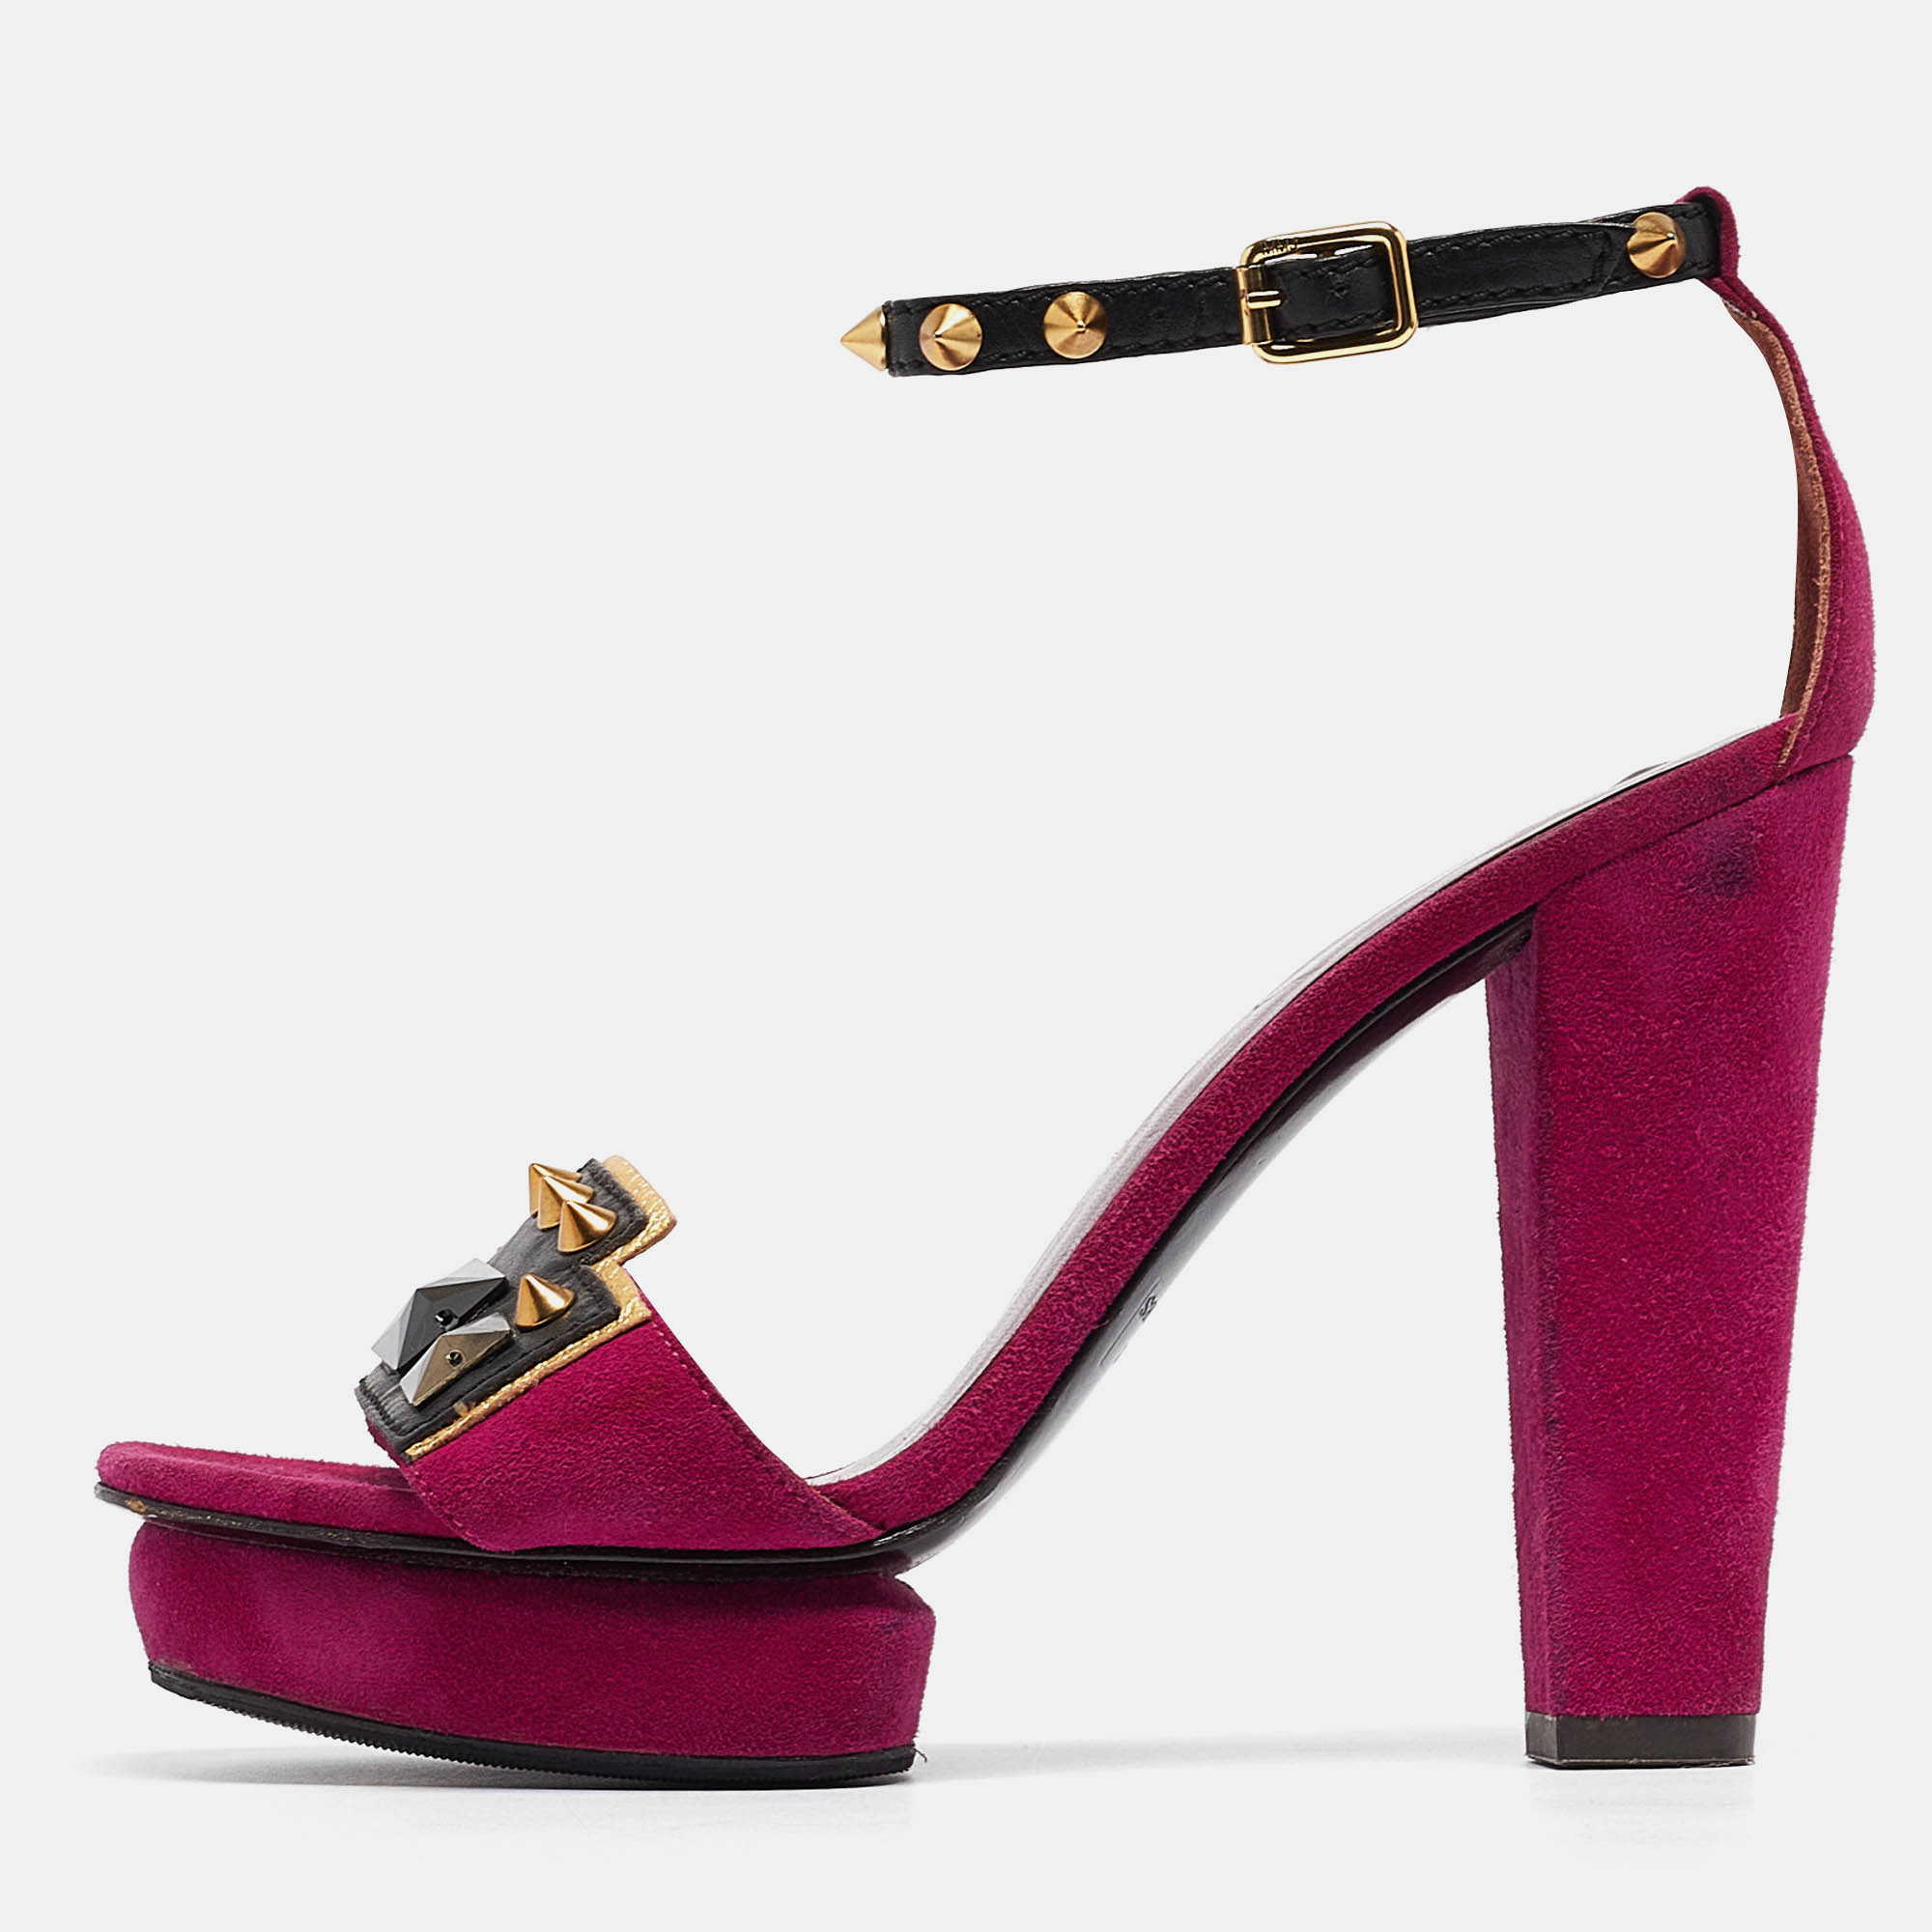 Marc by marc jacobs magenta suede and leather studded ankle strap sandals size 38